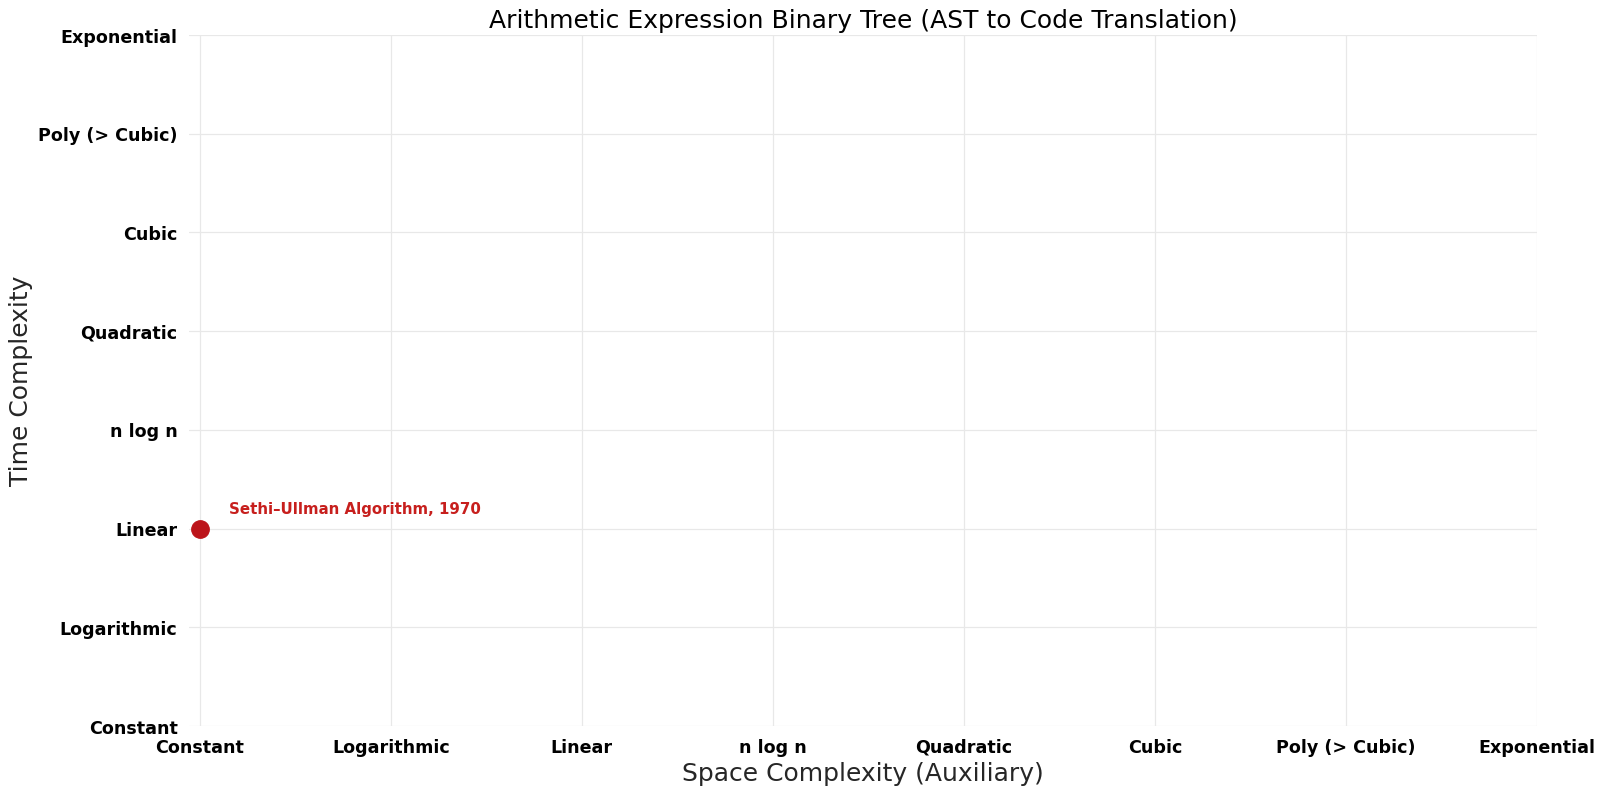 File:AST to Code Translation - Arithmetic Expression Binary Tree - Pareto Frontier.png